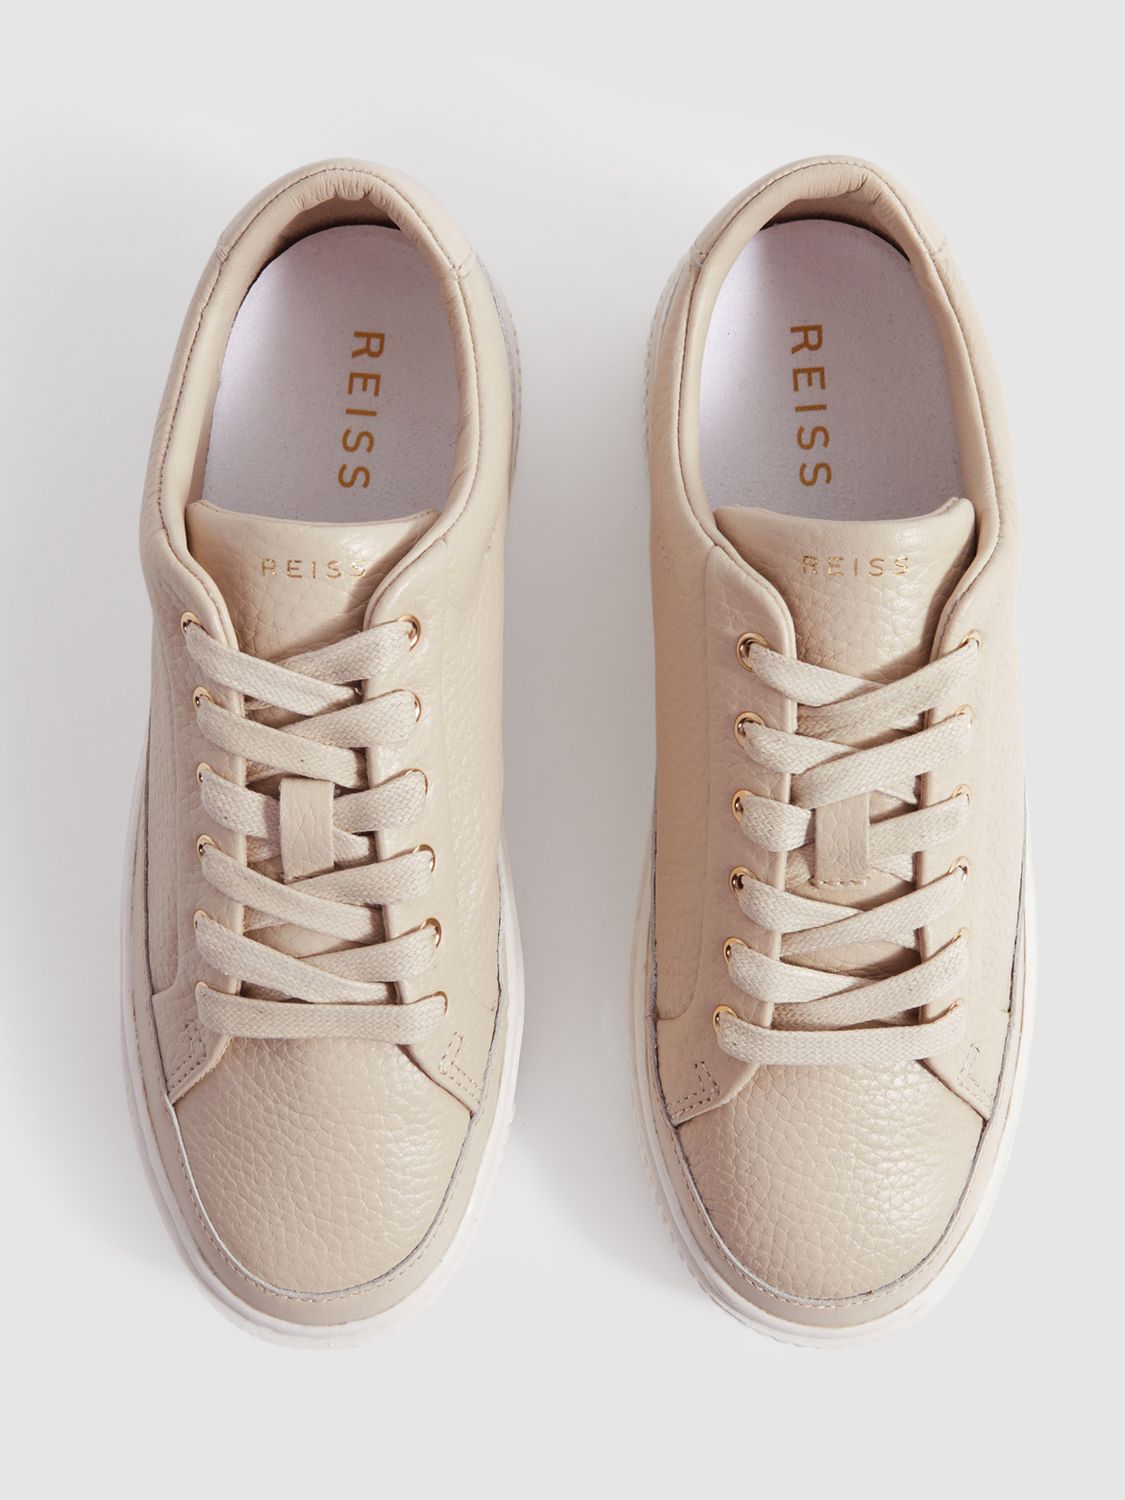 Buy Reiss Leanne Pebbled Leather Flatform Trainers, Nude Online at johnlewis.com